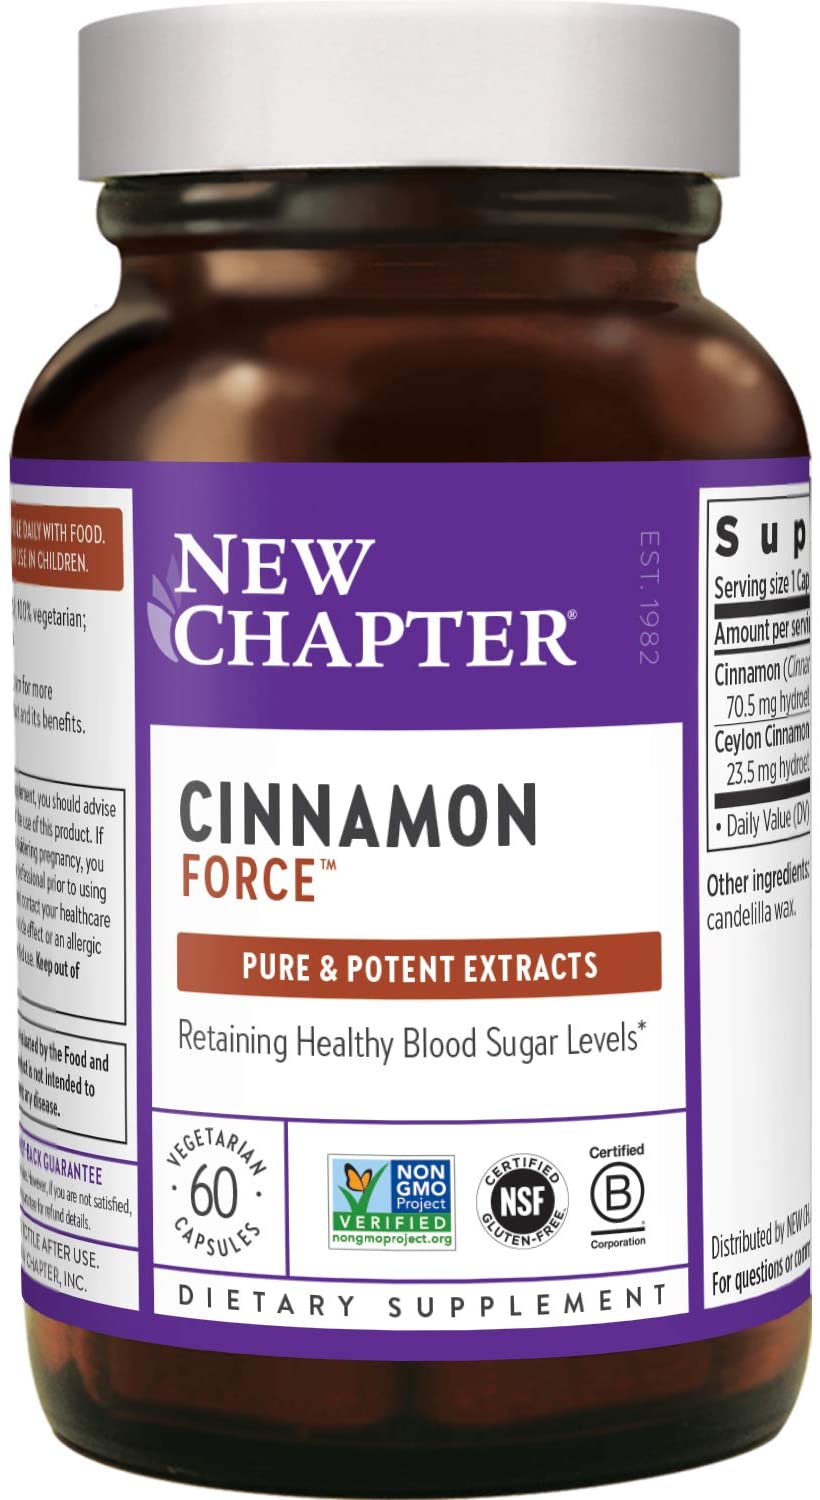 Review of New Chapter Cinnamon Supplement